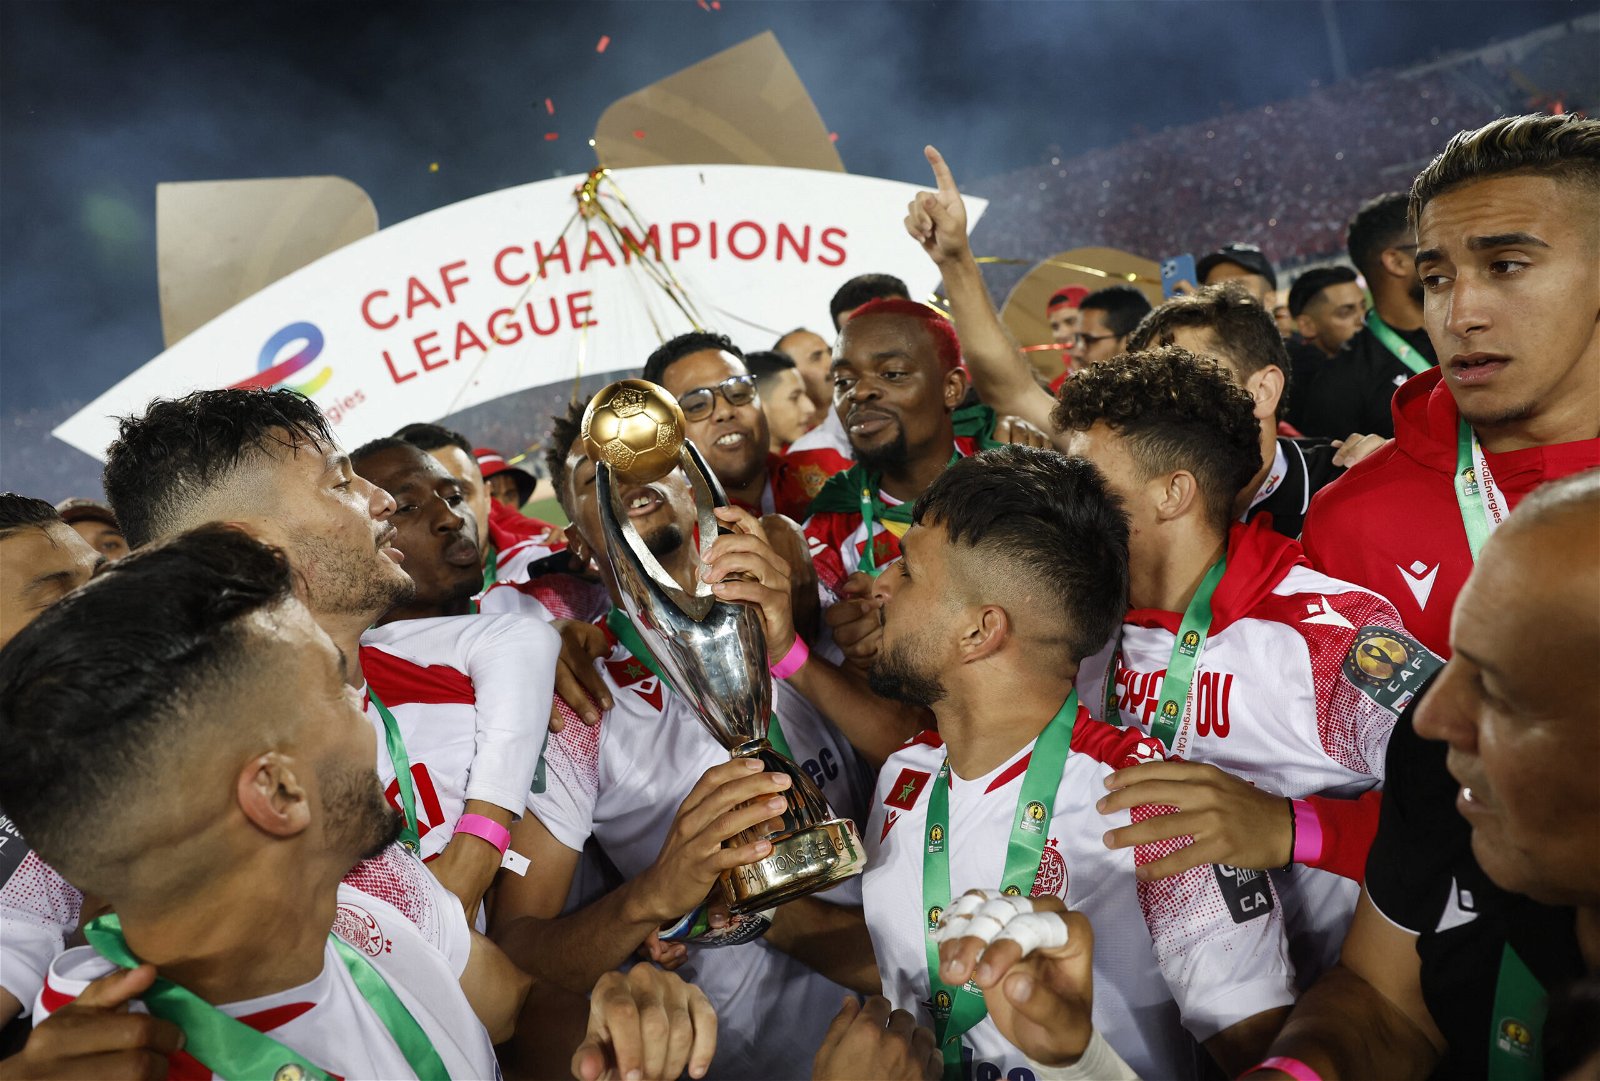 2022 CAF Champions League Winners